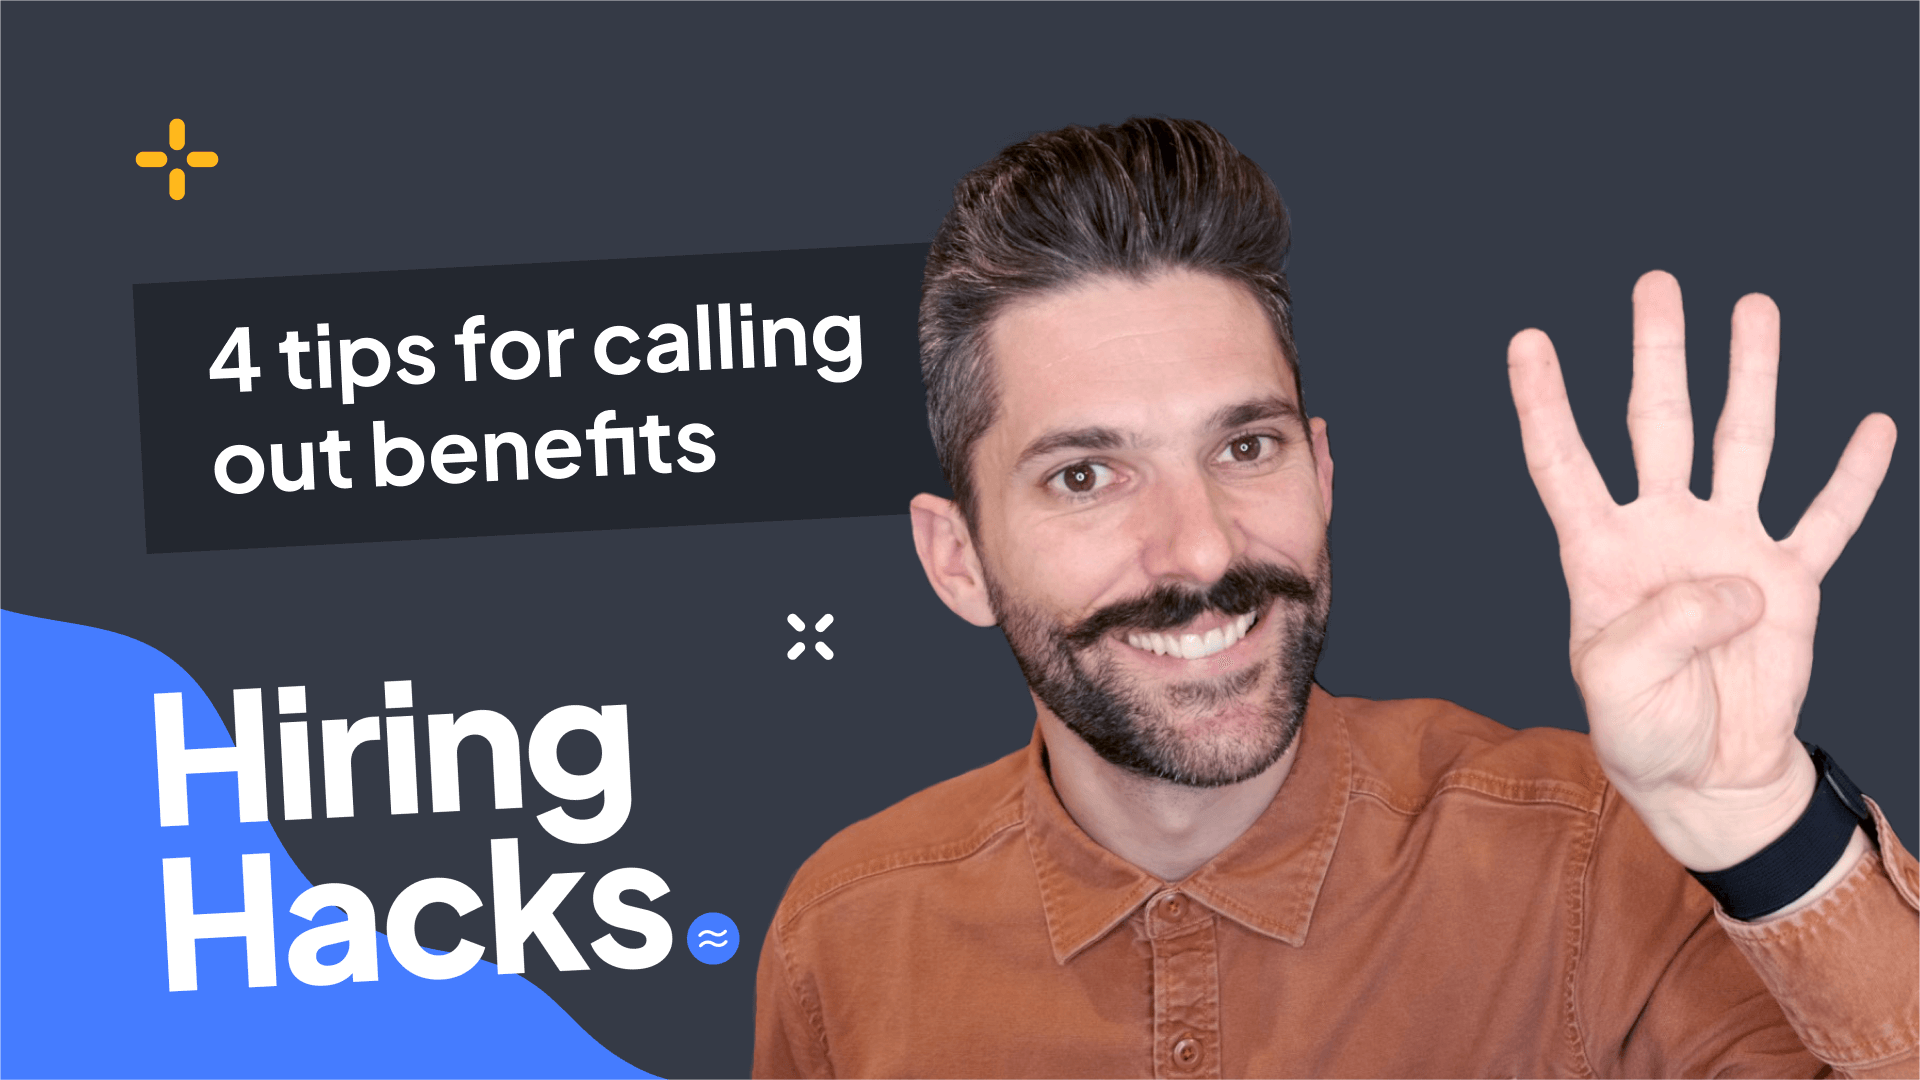 Hiring Hacks: 4 tips for calling out benefits in your job descriptions